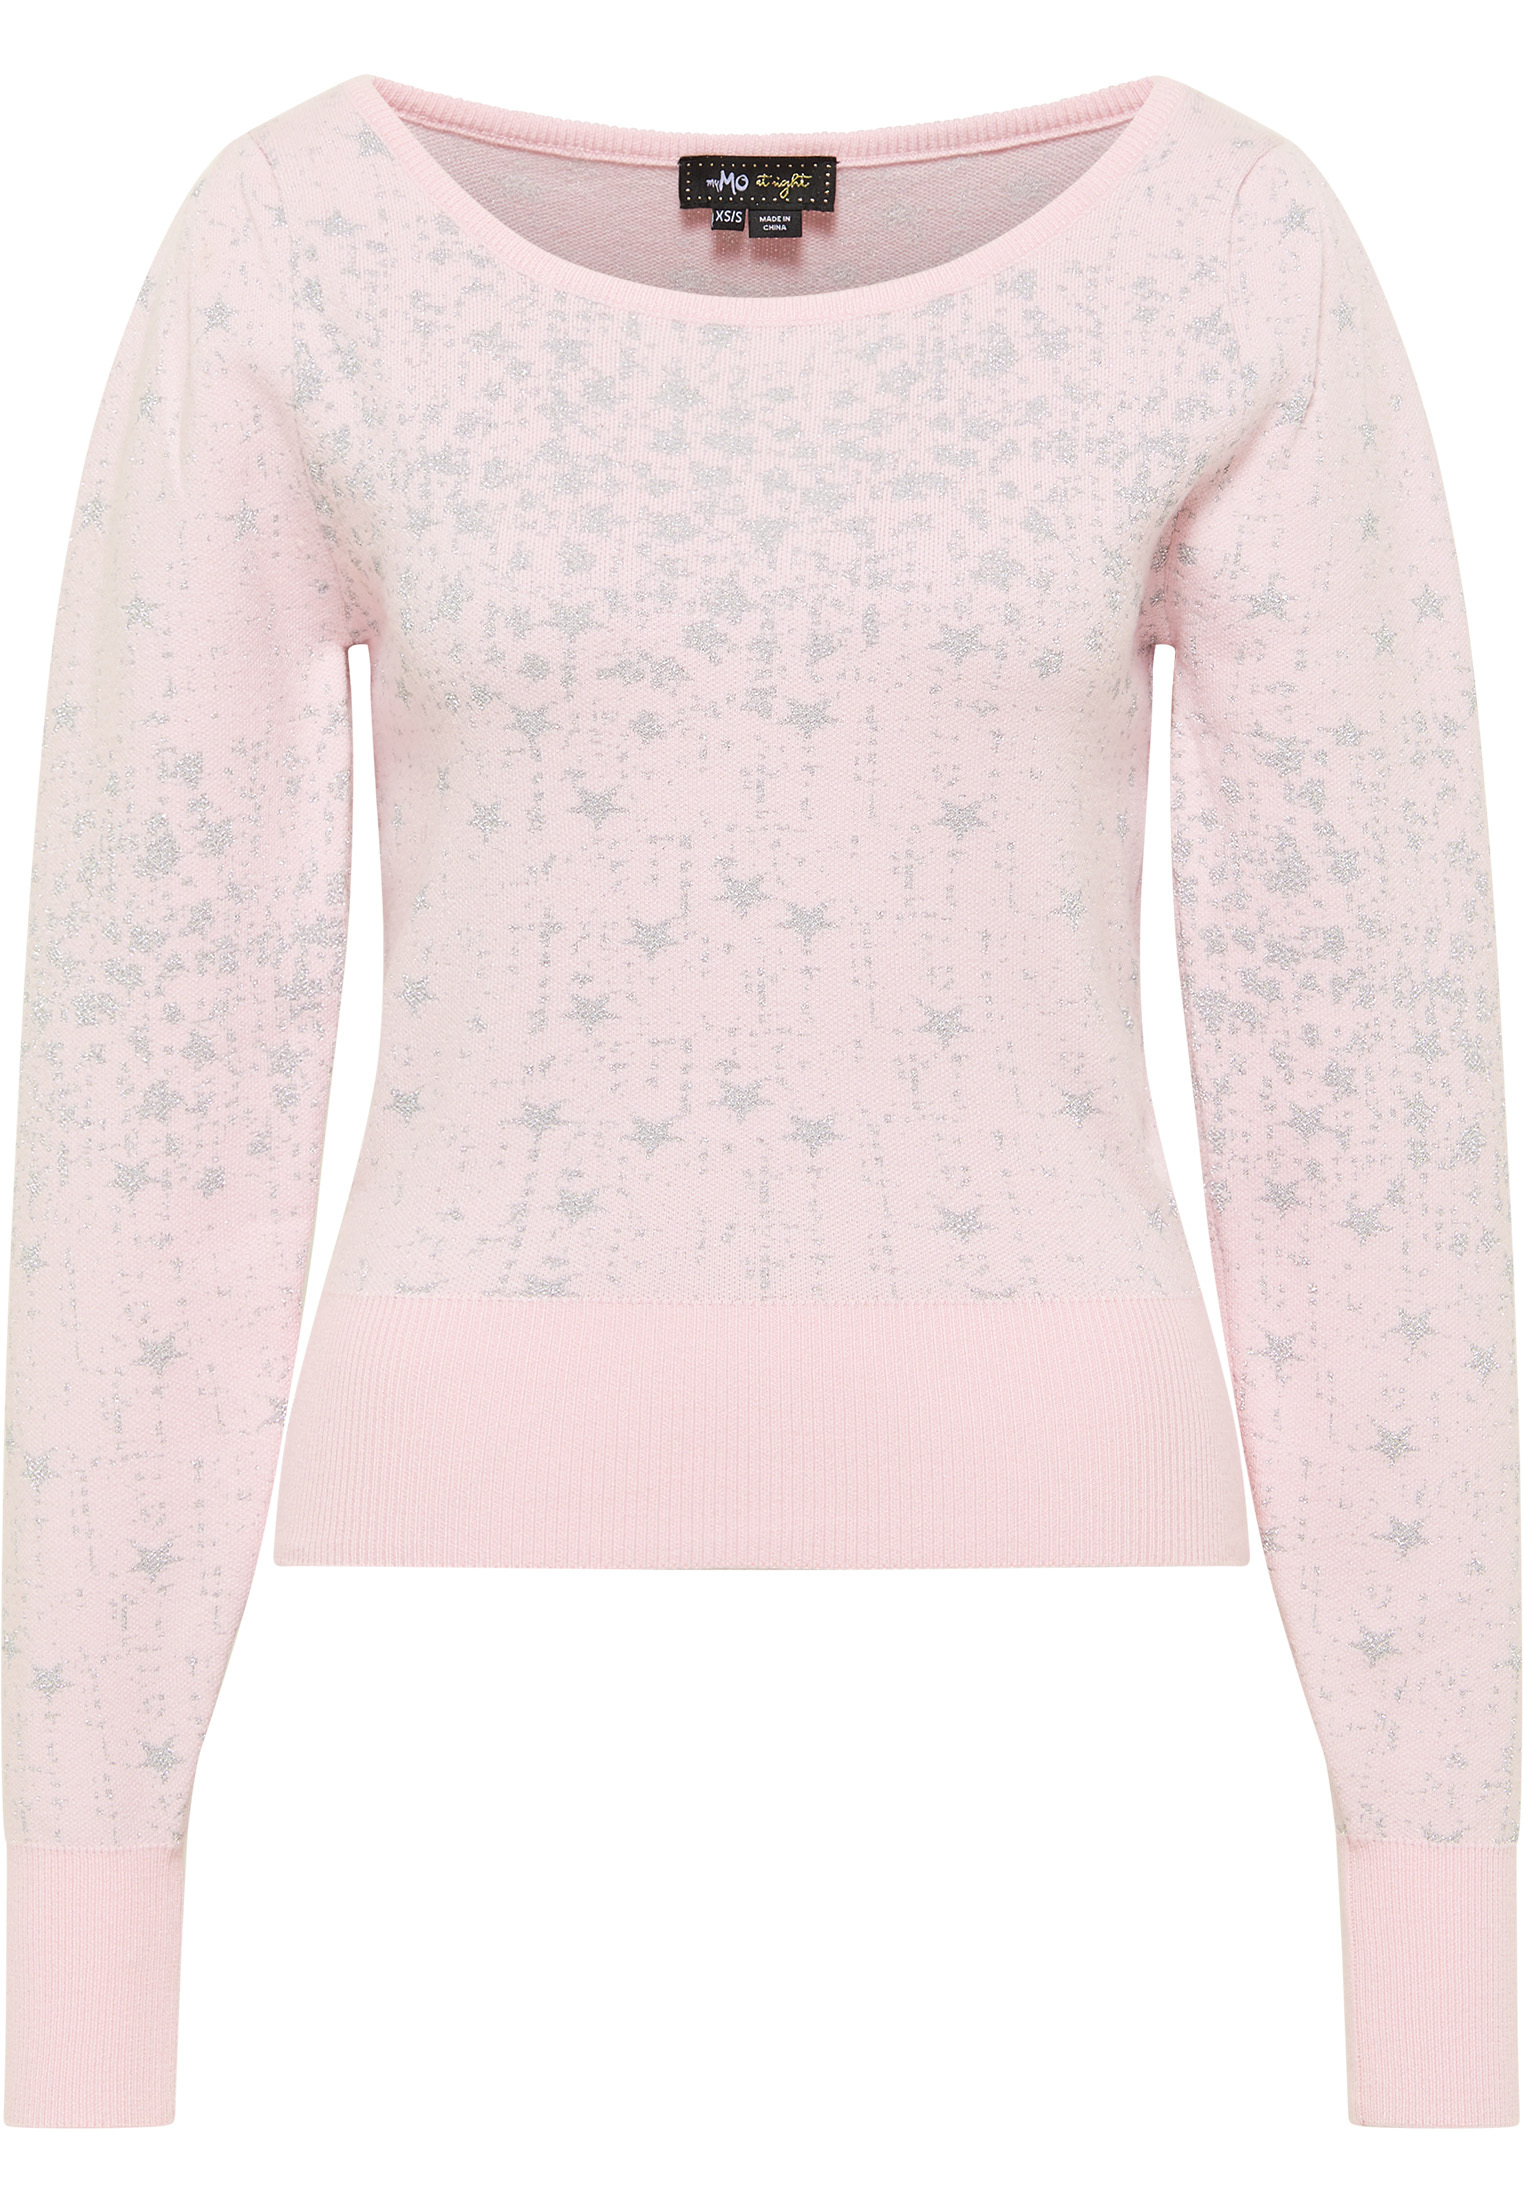 8ynzZ Donna myMo at night Pullover in Rosa Pastello 